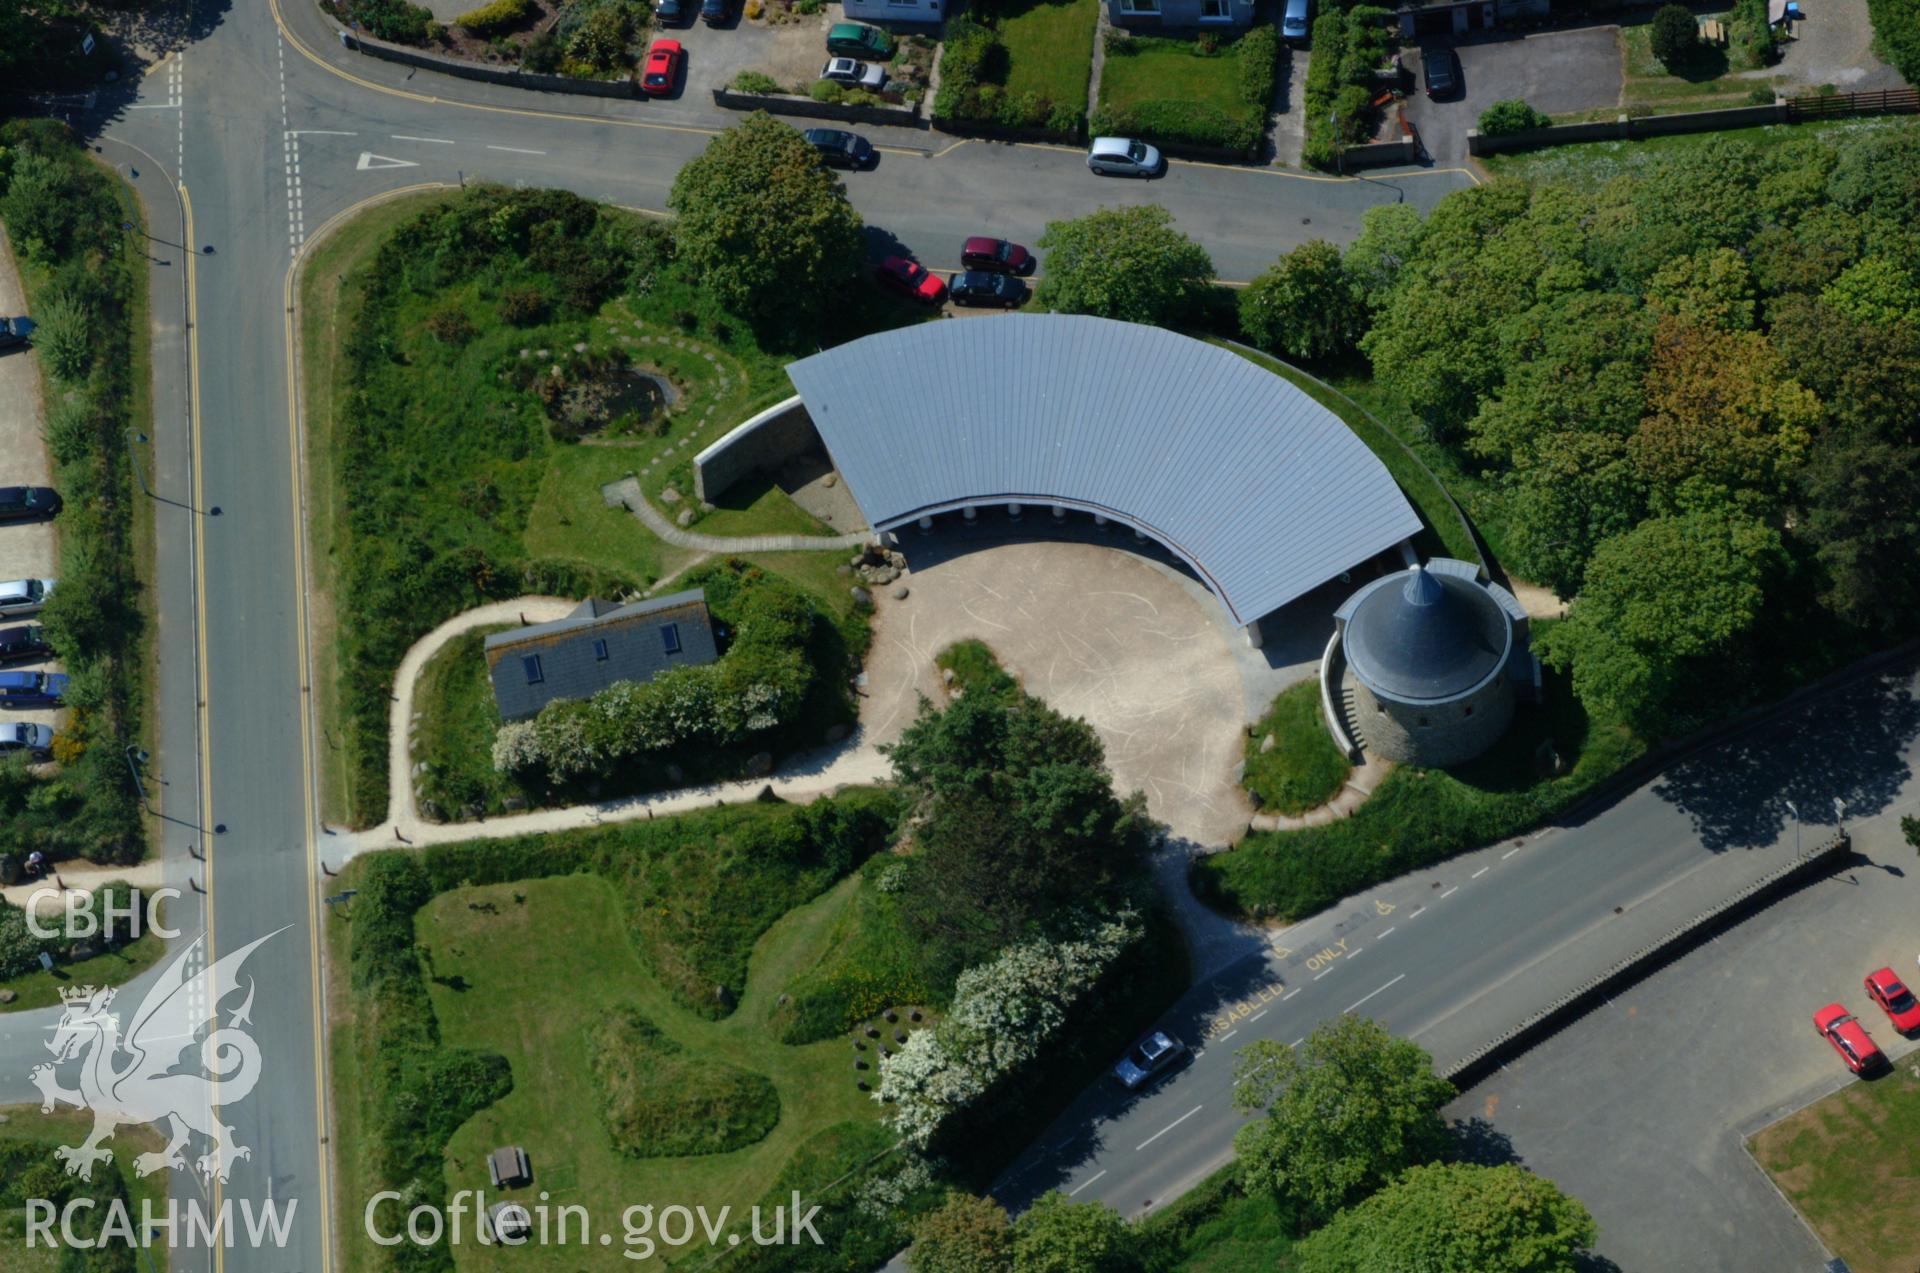 RCAHMW colour oblique aerial photograph of St David's Visitor Centre taken on 25/05/2004 by Toby Driver